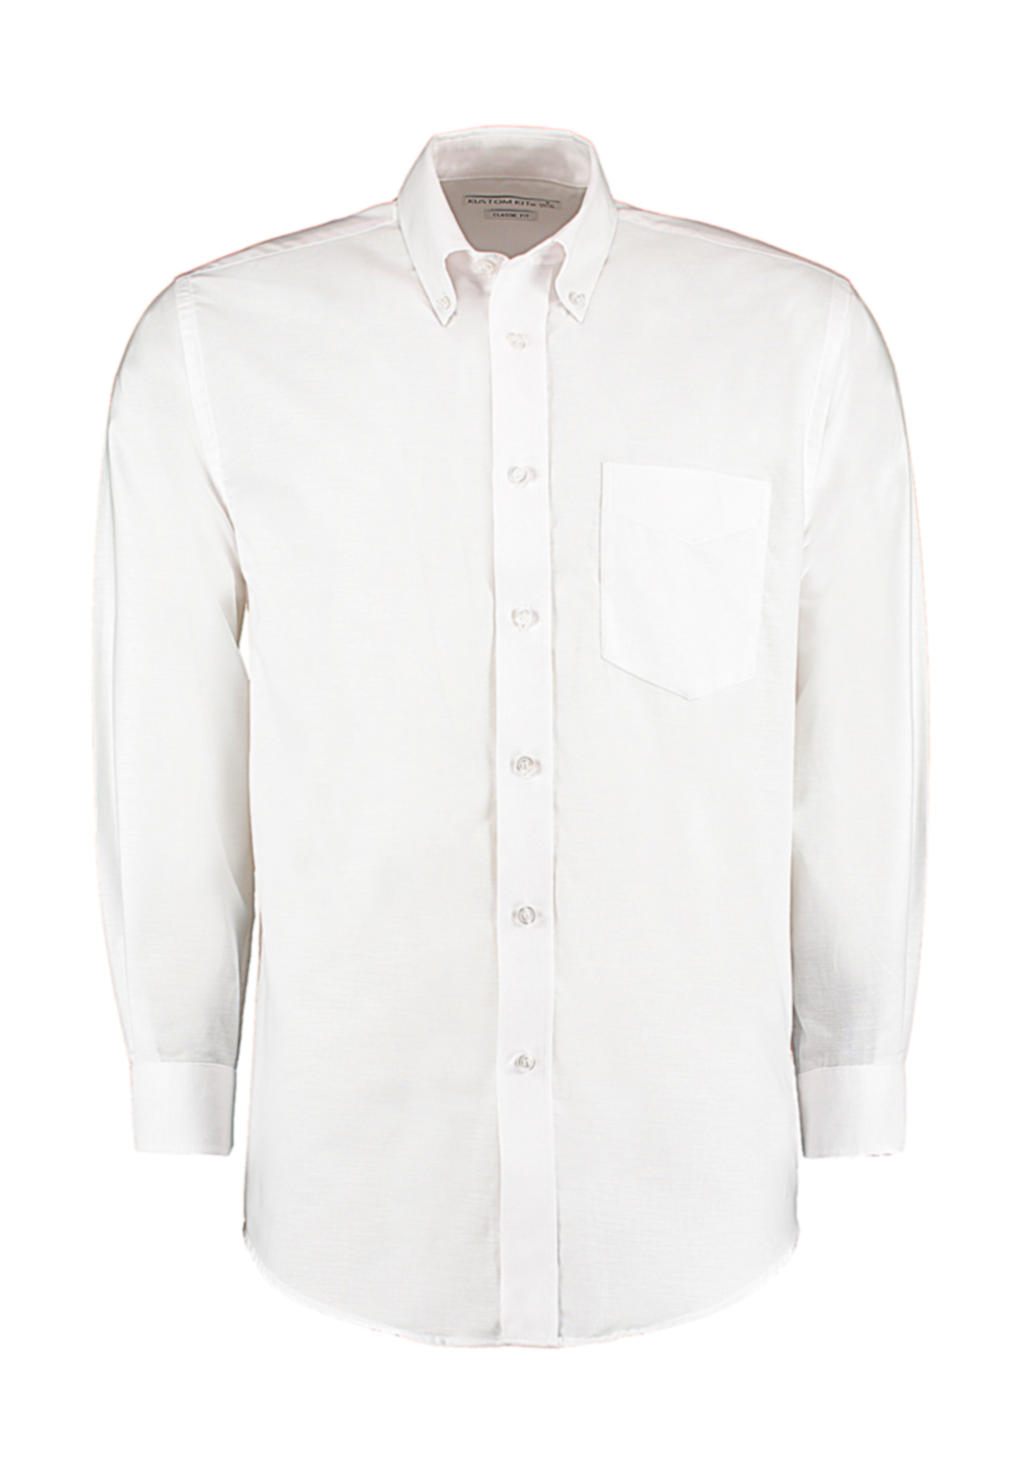  Classic Fit Workwear Oxford Shirt in Farbe White